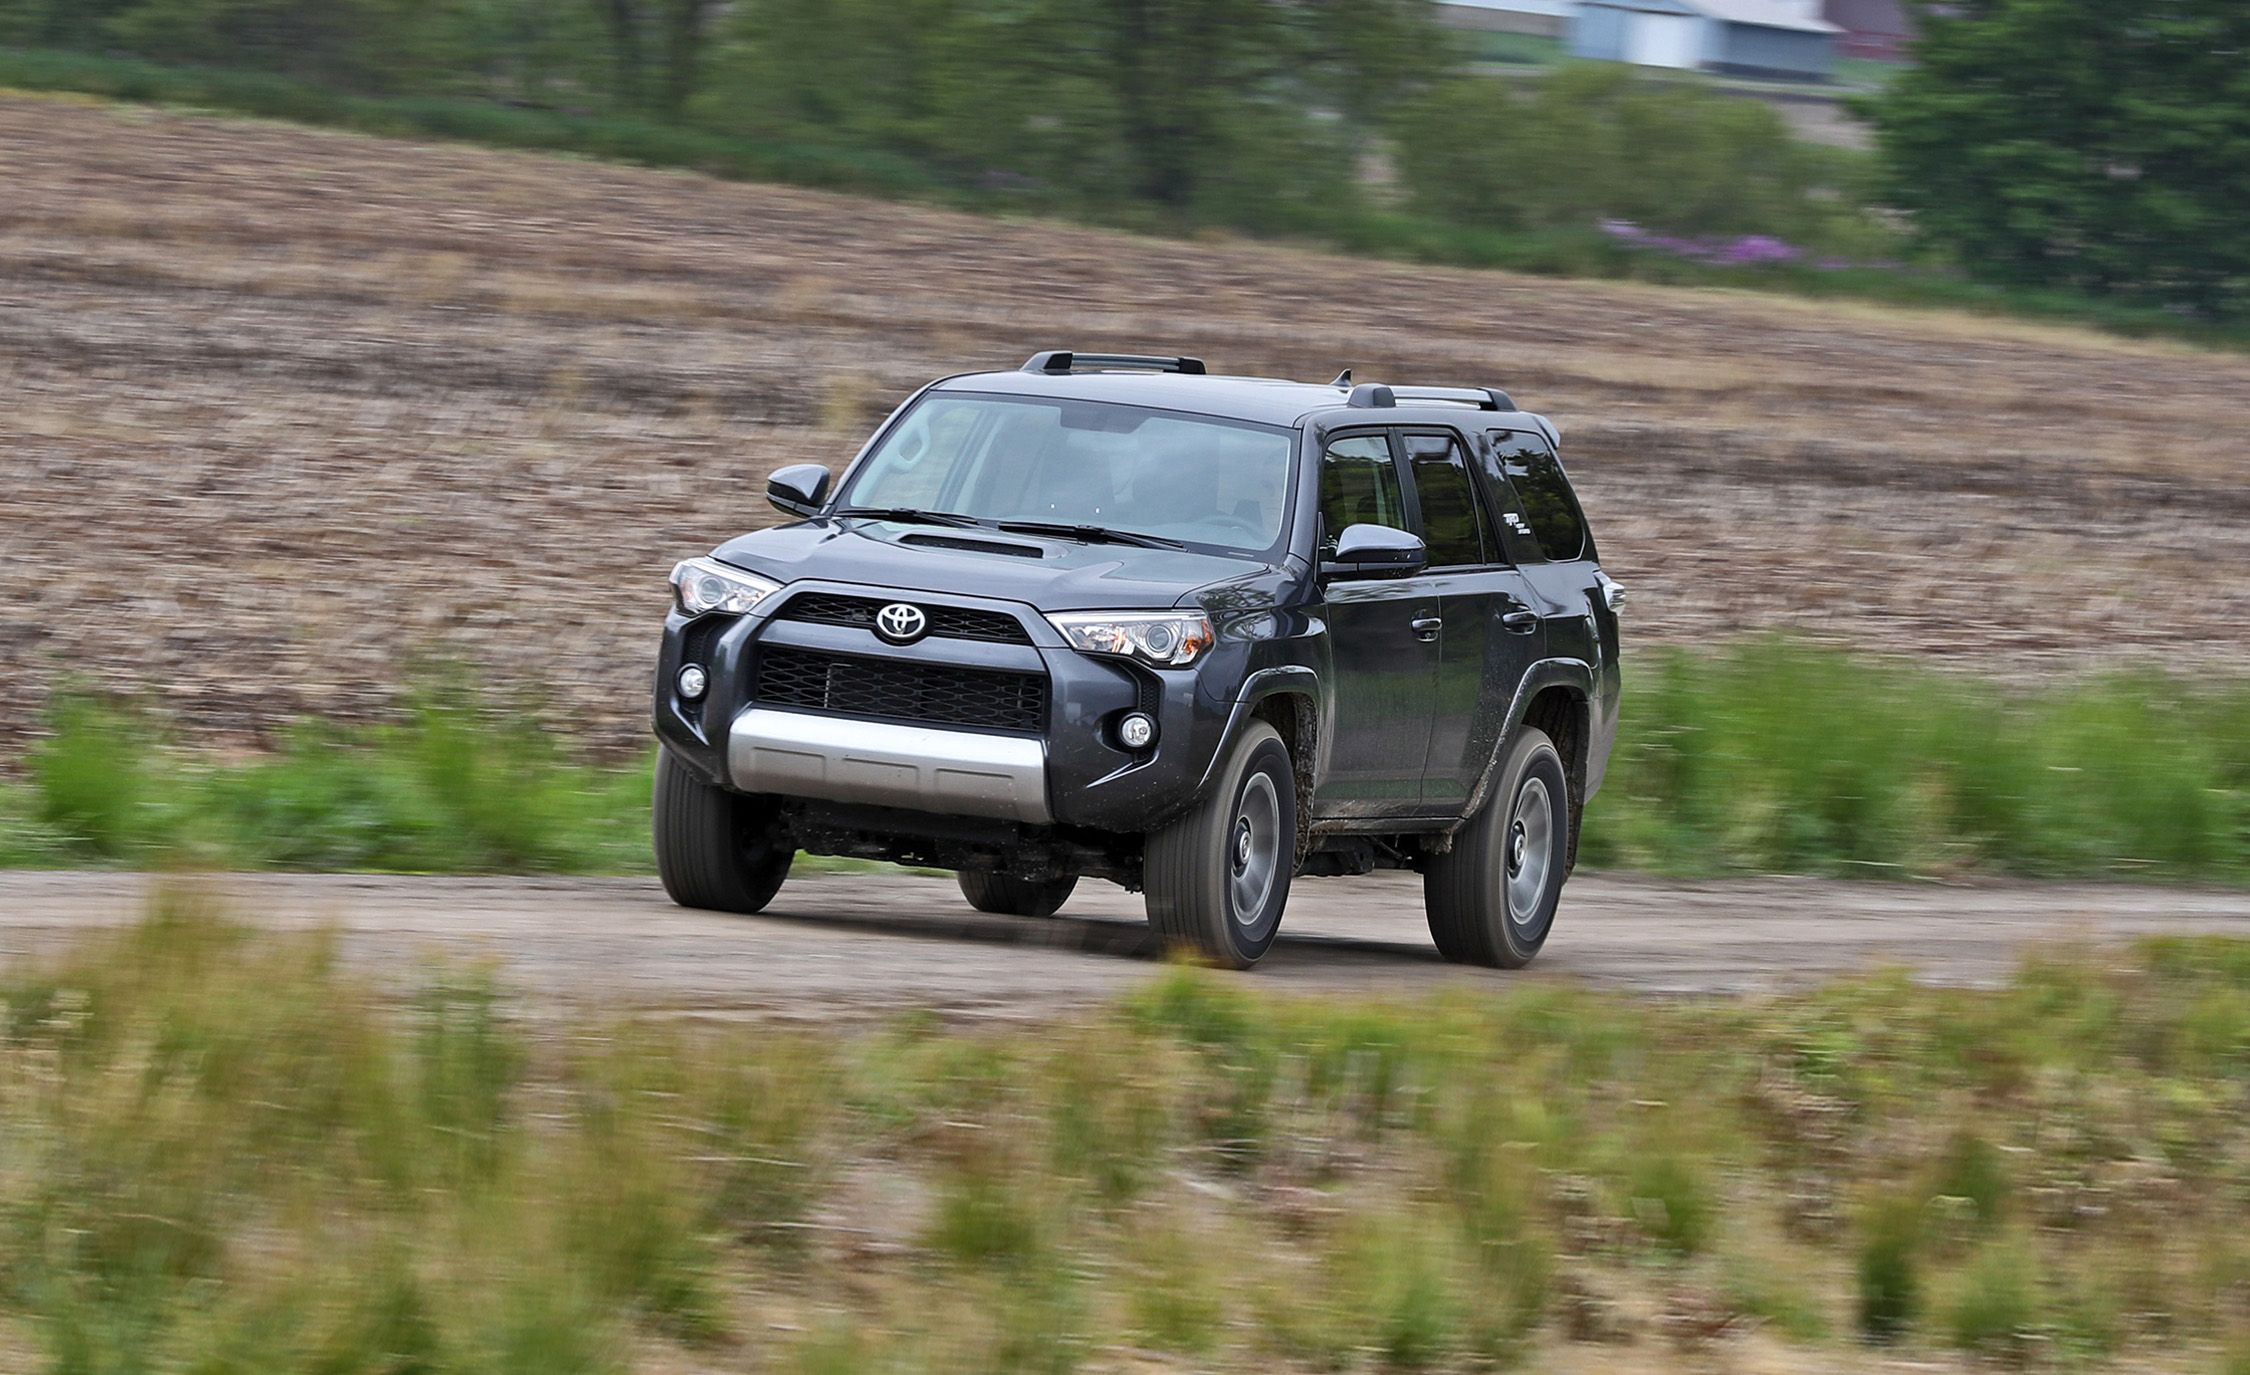 Toyota 4Runner Reviews | Toyota 4Runner Price, Photos, and Specs | Car ...